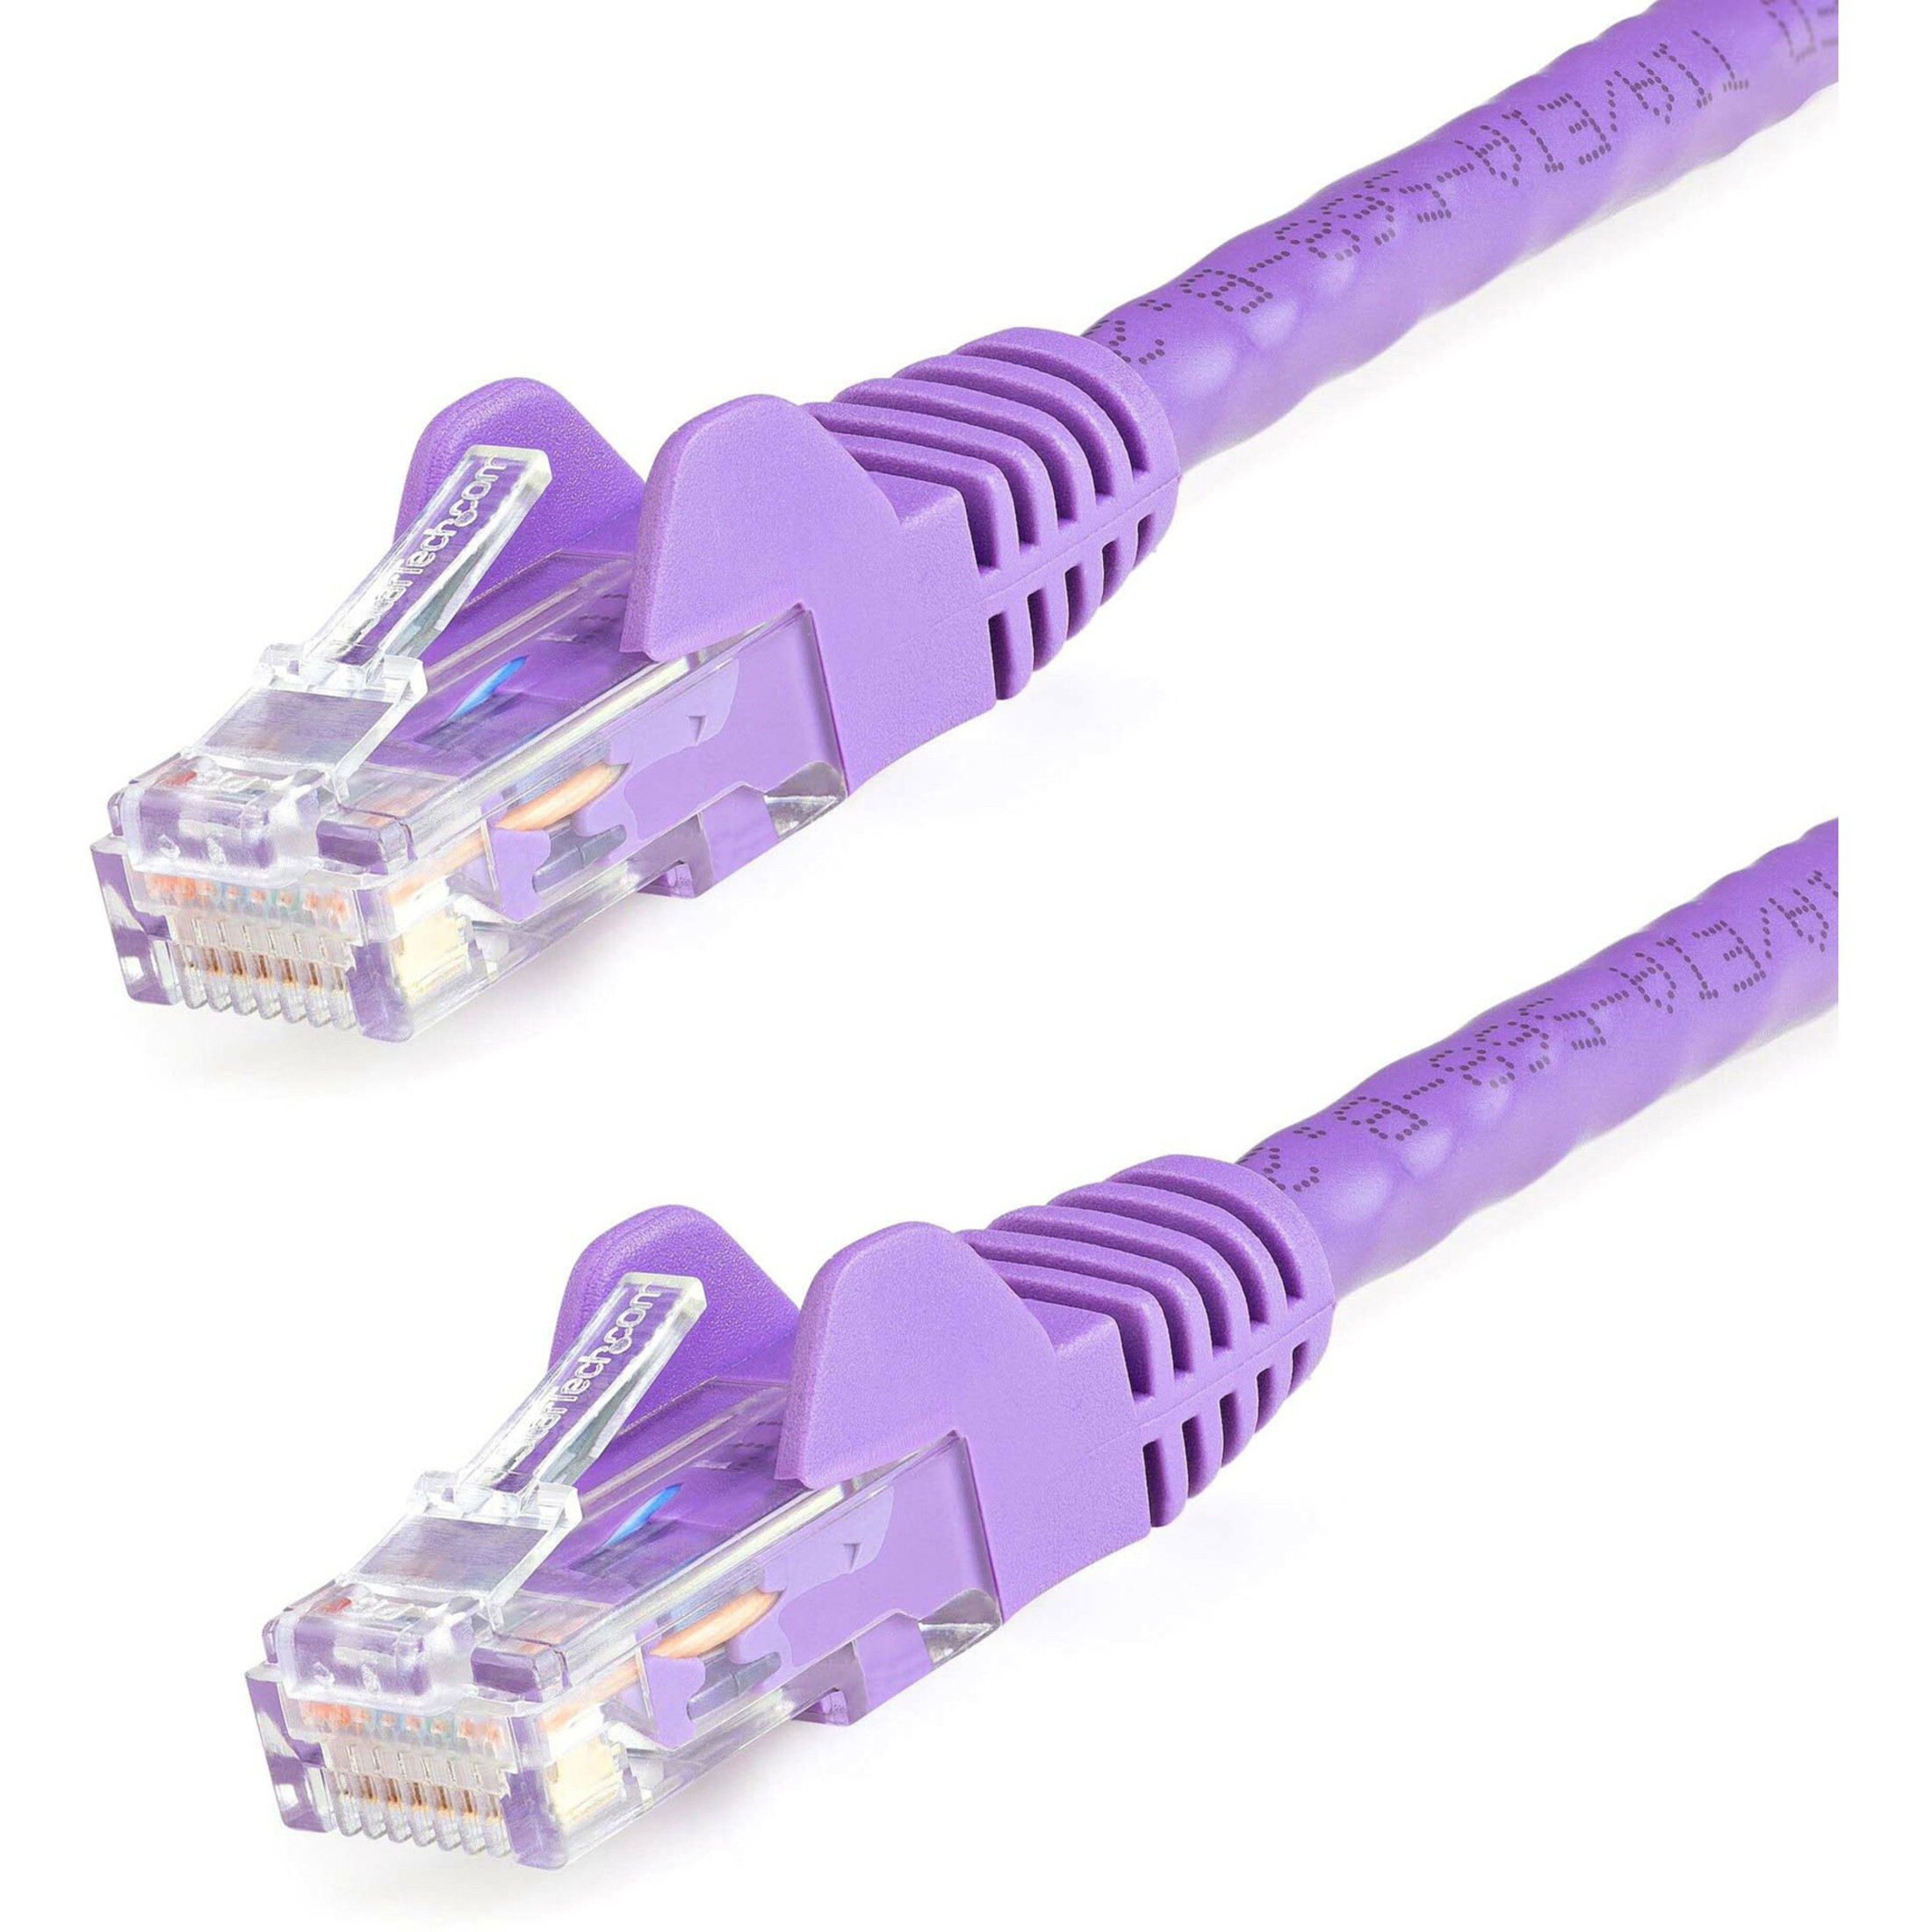 Startech .com 8ft CAT6 Ethernet CablePurple Snagless Gigabit100W PoE UTP 650MHz Category 6 Patch Cord UL Certified Wiring/TIA8ft Purp… N6PATCH8PL